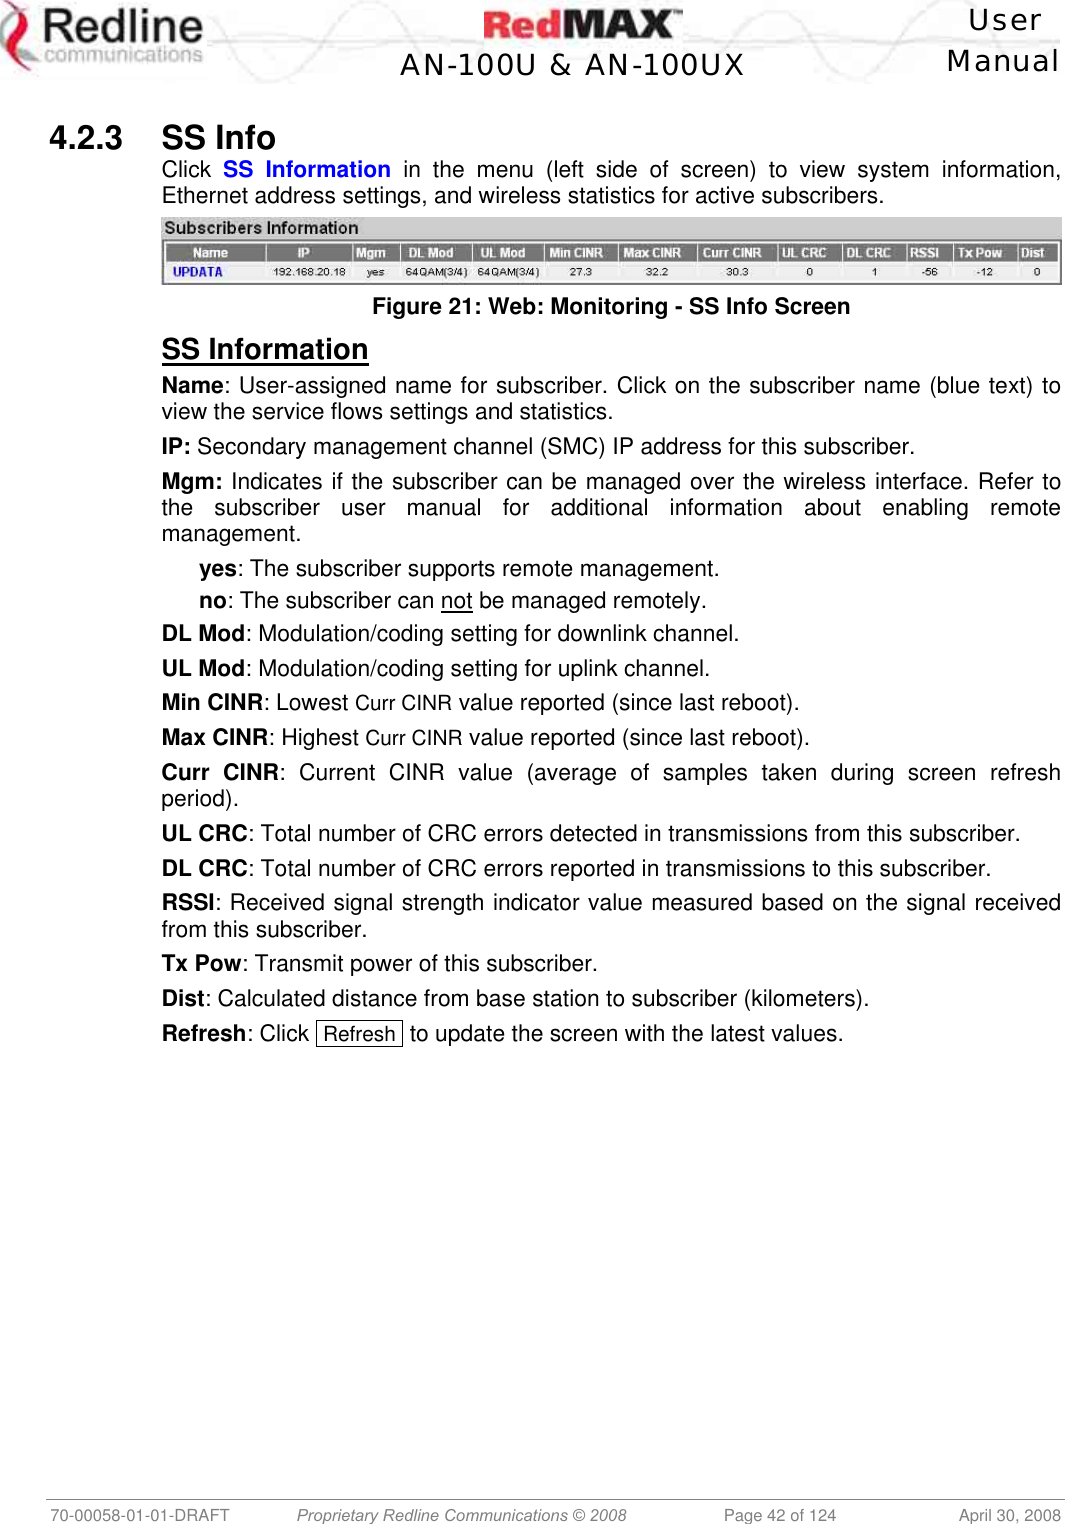    User  AN-100U &amp; AN-100UX Manual   70-00058-01-01-DRAFT  Proprietary Redline Communications © 2008   Page 42 of 124  April 30, 2008  4.2.3 SS Info Click  SS Information in the menu (left side of screen) to view system information, Ethernet address settings, and wireless statistics for active subscribers.  Figure 21: Web: Monitoring - SS Info Screen SS Information Name: User-assigned name for subscriber. Click on the subscriber name (blue text) to view the service flows settings and statistics. IP: Secondary management channel (SMC) IP address for this subscriber. Mgm: Indicates if the subscriber can be managed over the wireless interface. Refer to the subscriber user manual for additional information about enabling remote management.  yes: The subscriber supports remote management. no: The subscriber can not be managed remotely. DL Mod: Modulation/coding setting for downlink channel.  UL Mod: Modulation/coding setting for uplink channel. Min CINR: Lowest Curr CINR value reported (since last reboot). Max CINR: Highest Curr CINR value reported (since last reboot). Curr CINR: Current CINR value (average of samples taken during screen refresh period). UL CRC: Total number of CRC errors detected in transmissions from this subscriber. DL CRC: Total number of CRC errors reported in transmissions to this subscriber. RSSI: Received signal strength indicator value measured based on the signal received from this subscriber. Tx Pow: Transmit power of this subscriber. Dist: Calculated distance from base station to subscriber (kilometers). Refresh: Click  Refresh  to update the screen with the latest values. 